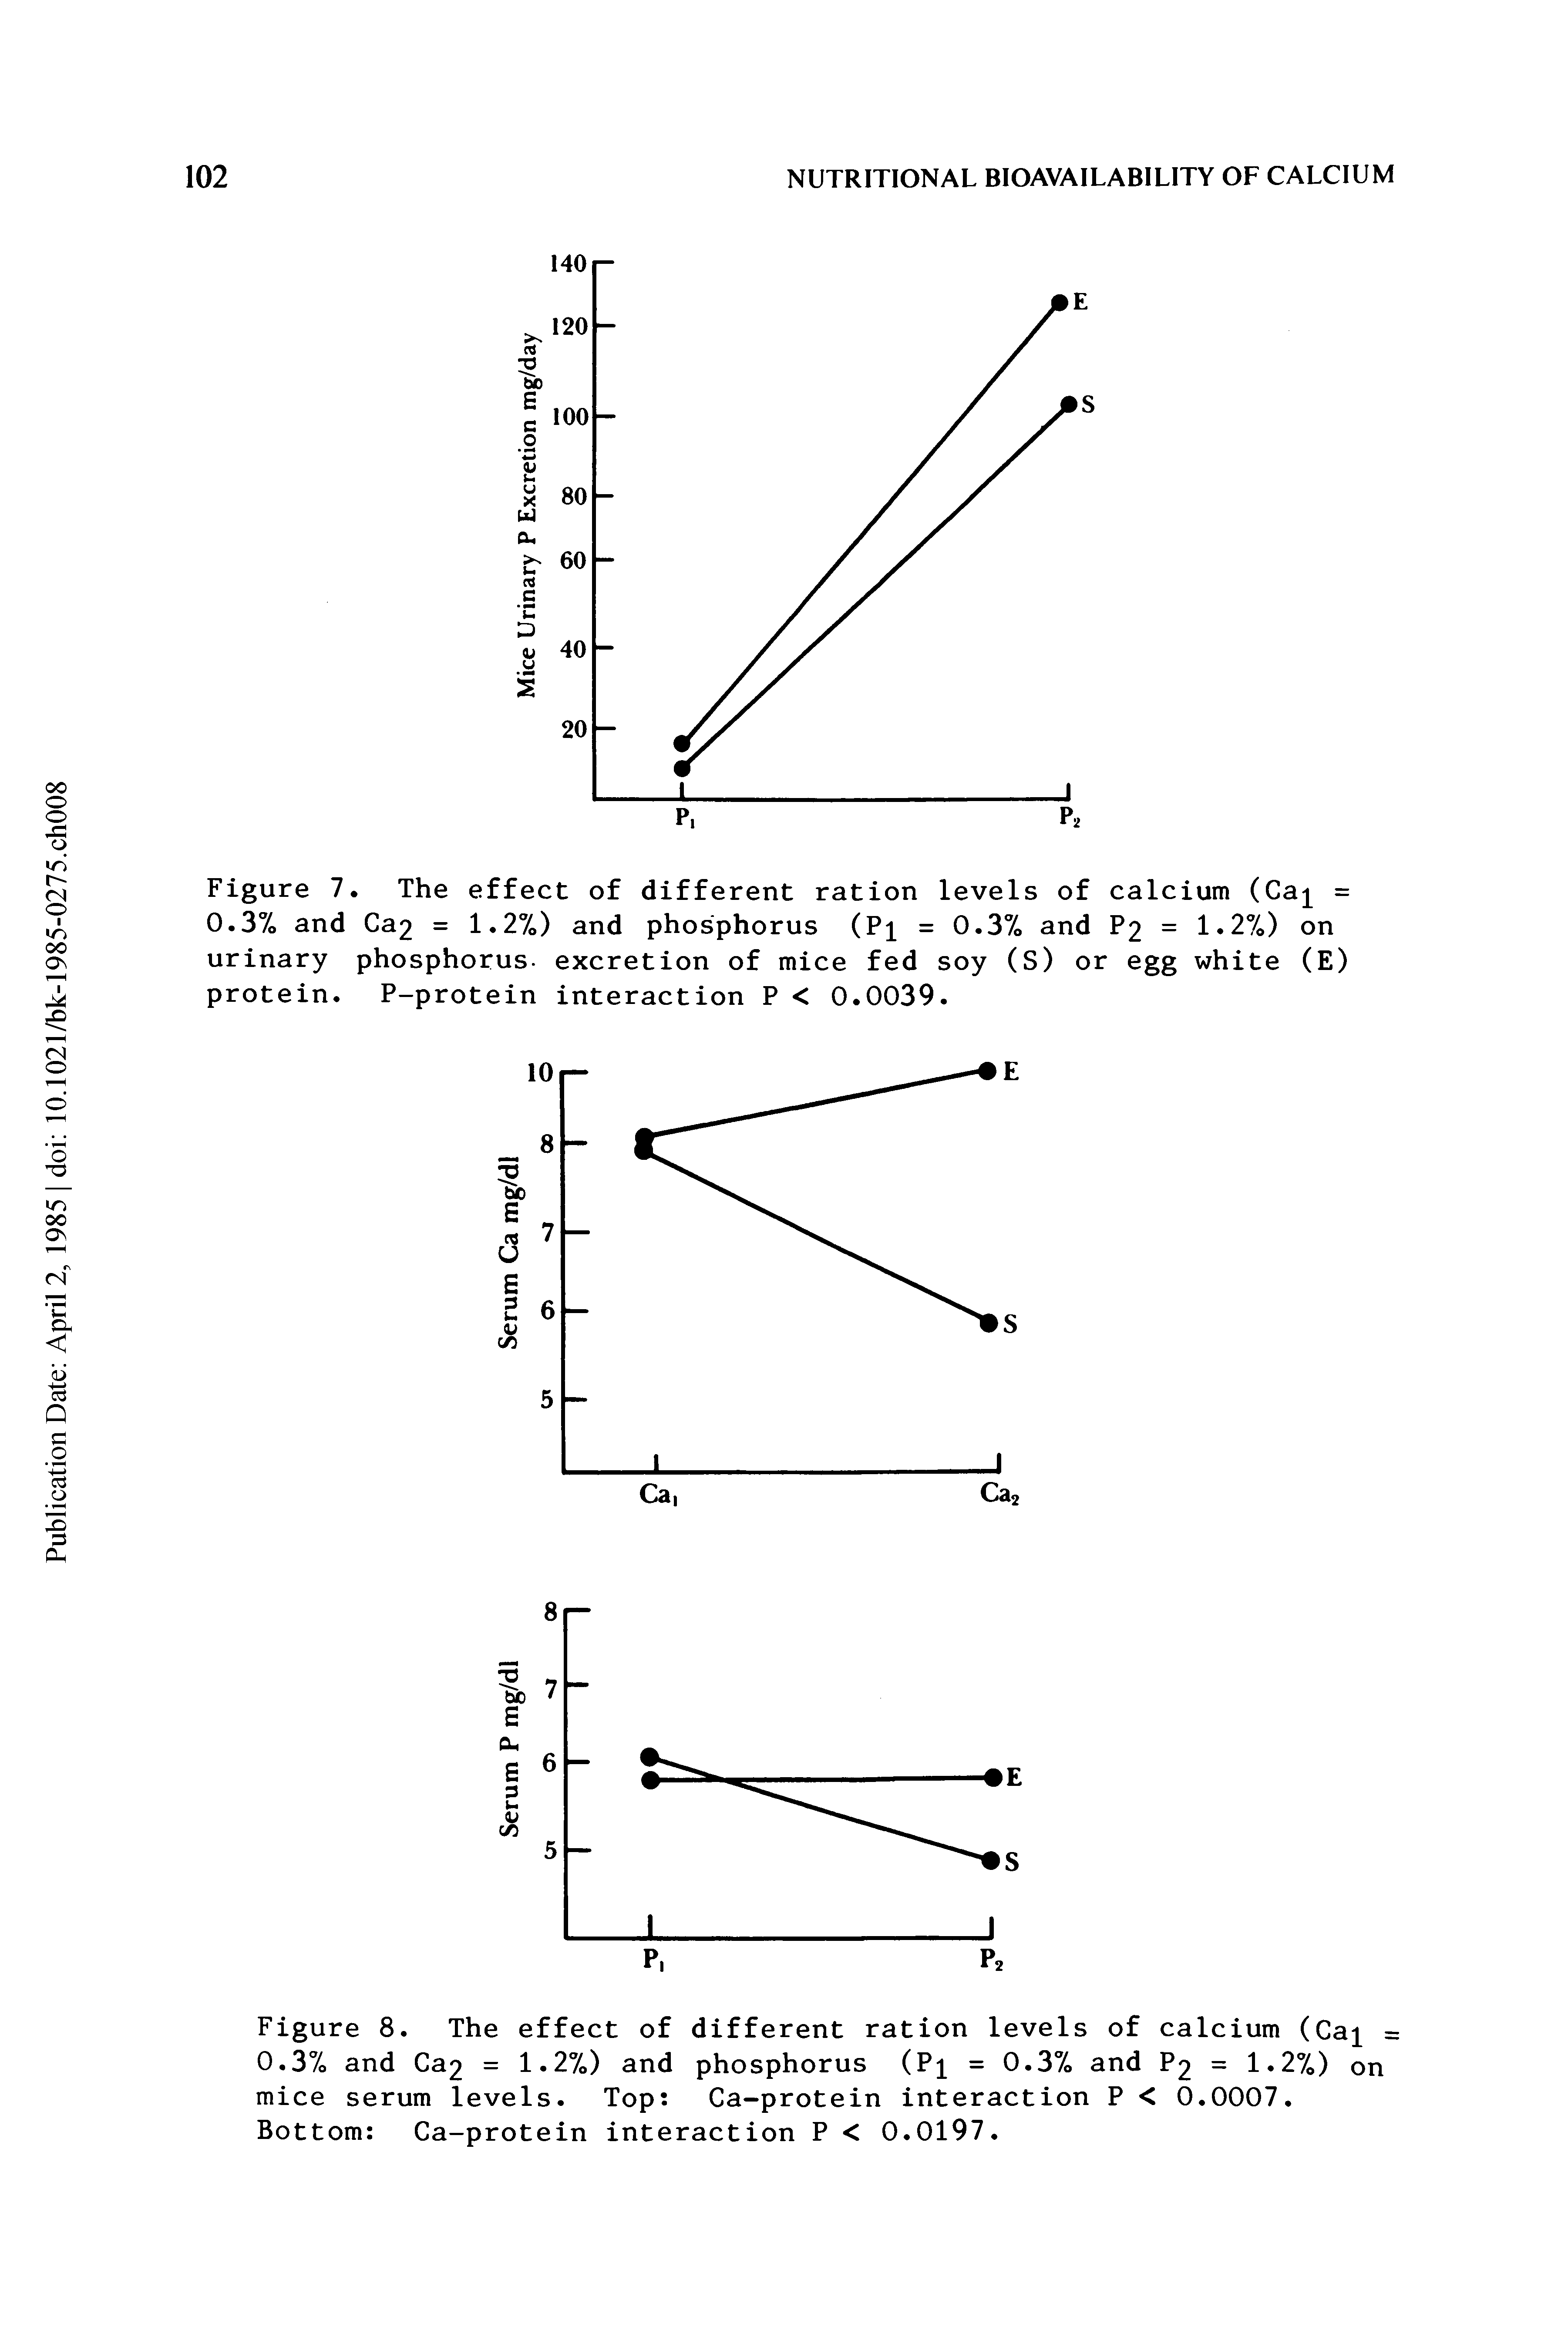 Figure 8. The effect of different ration levels of calcium (Cai = O.37o and Ca2 = 1.2%) and phosphorus (Pi = 0.37> and P2 = 1.27 ) on mice serum levels. Top Ca-protein interaction P < 0.0007. Bottom Ca-protein interaction P < 0.0197.